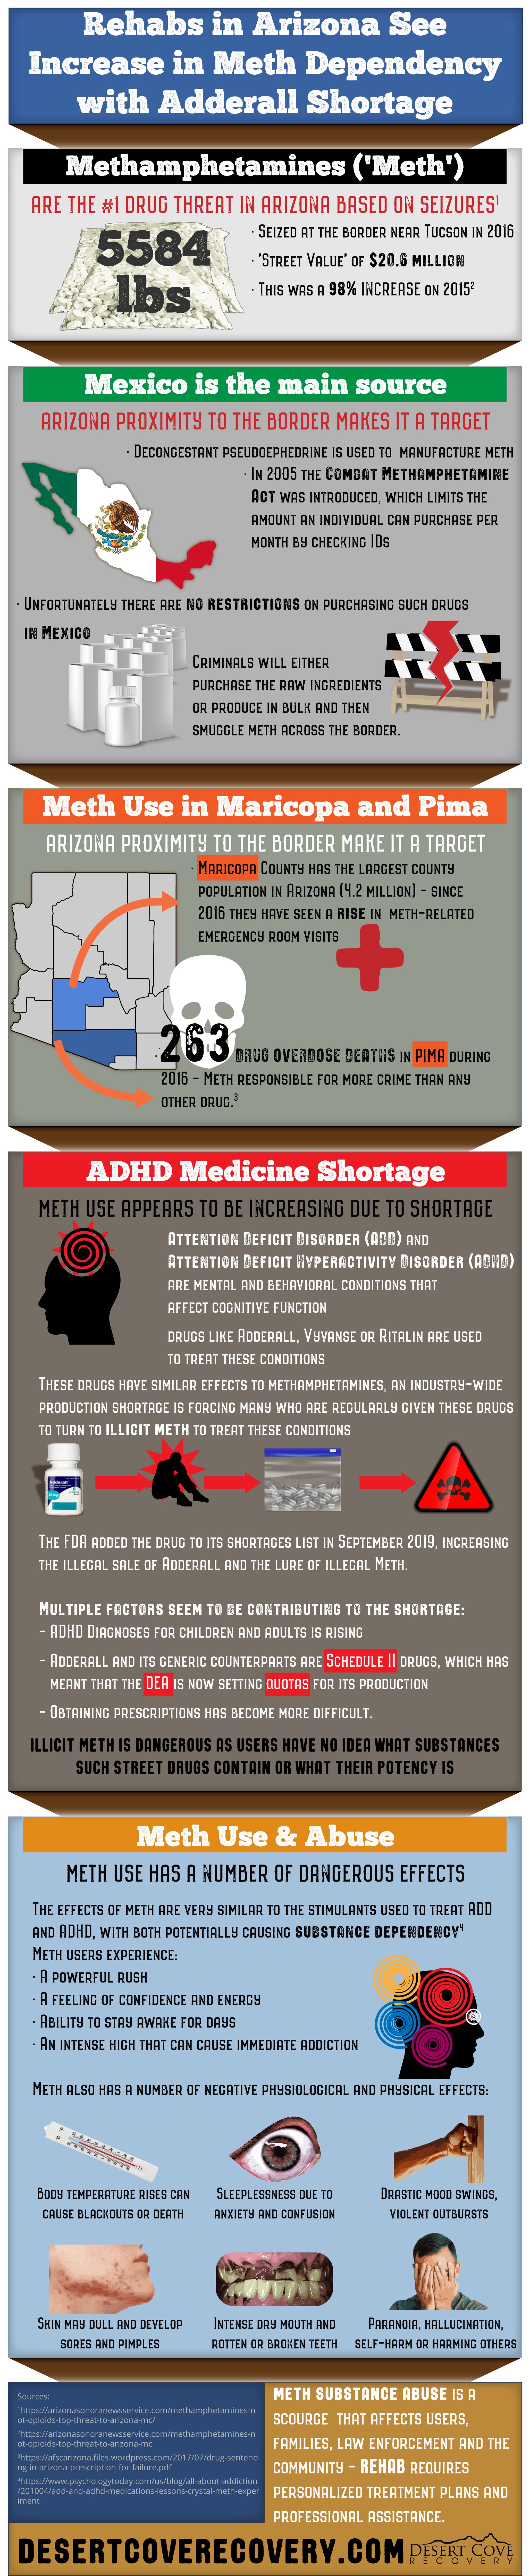 Rehabs in Arizona seeing Increase in Need for Meth Addiction Treatment as Adderall Shortage